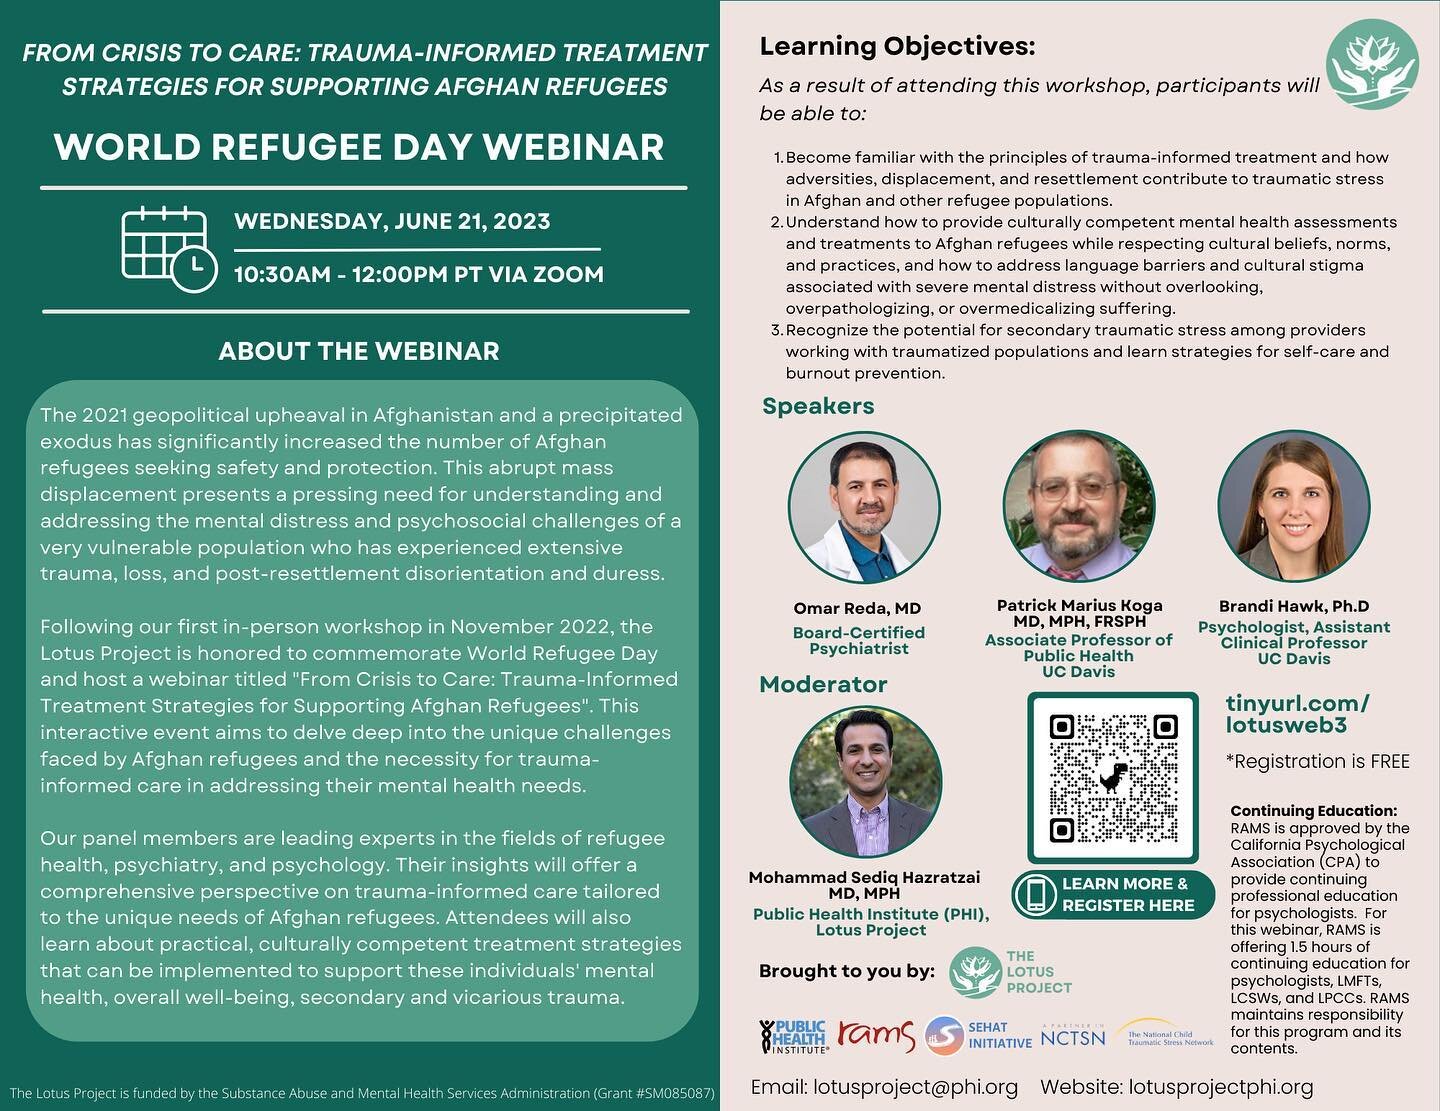 Join us on Wednesday, June 21 from 10:30AM-12PM on Zoom to honor World Refugee Day! This webinar &amp; panel will address unique challenges faced by Afghan refugees and how trauma-informed care can be utilized to address their mental health needs.

R